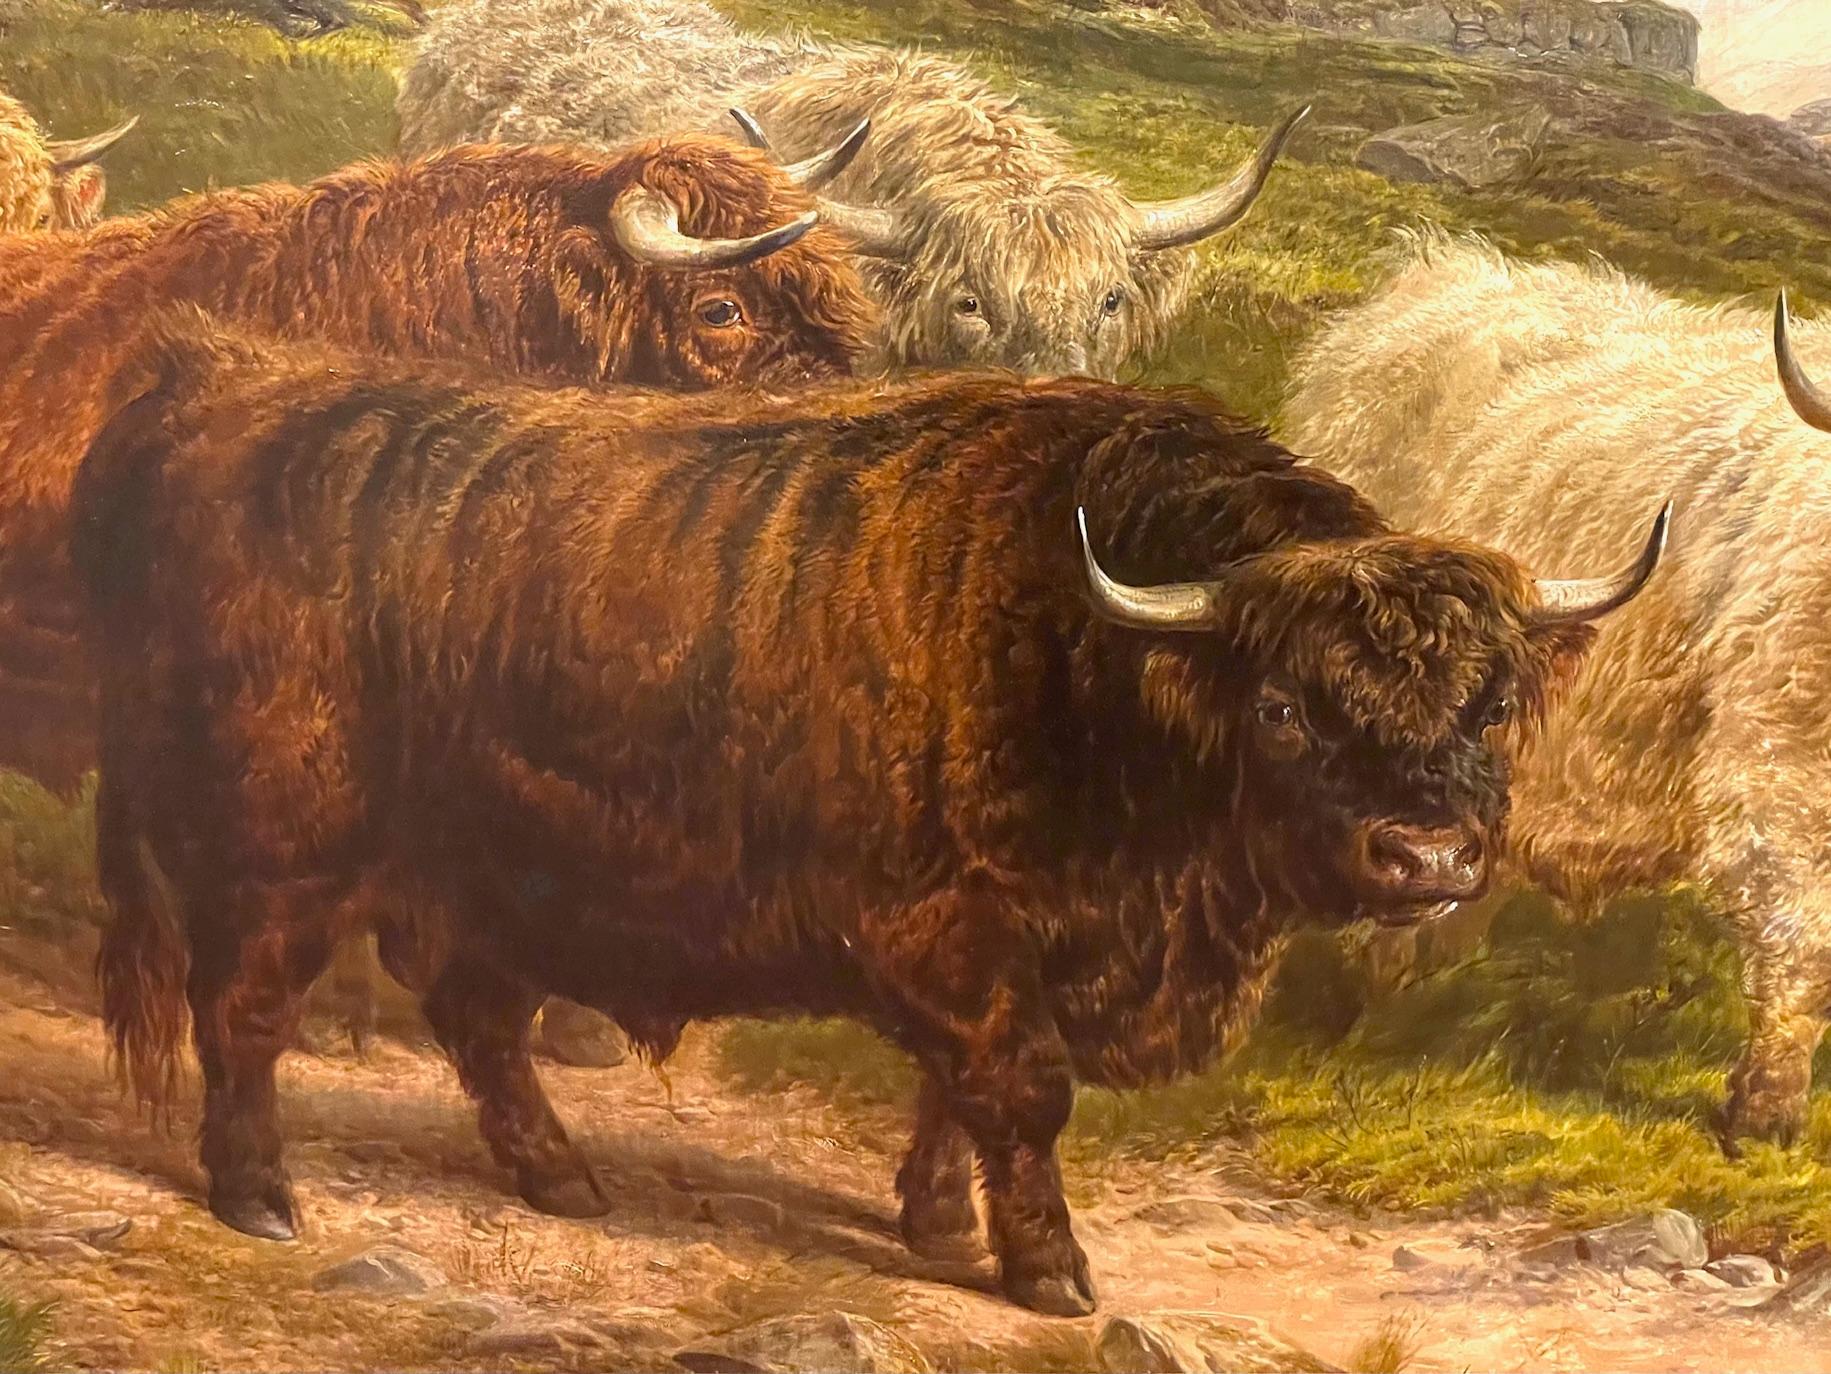 Massive size, this six foot long oil painting by Charles Jones (1836-1902) makes an impression!  Award-winning artist, Jones won the gold medal at the Crystal Palace exhibition in 1890 for his distinctive style depicting animals, particularly cows